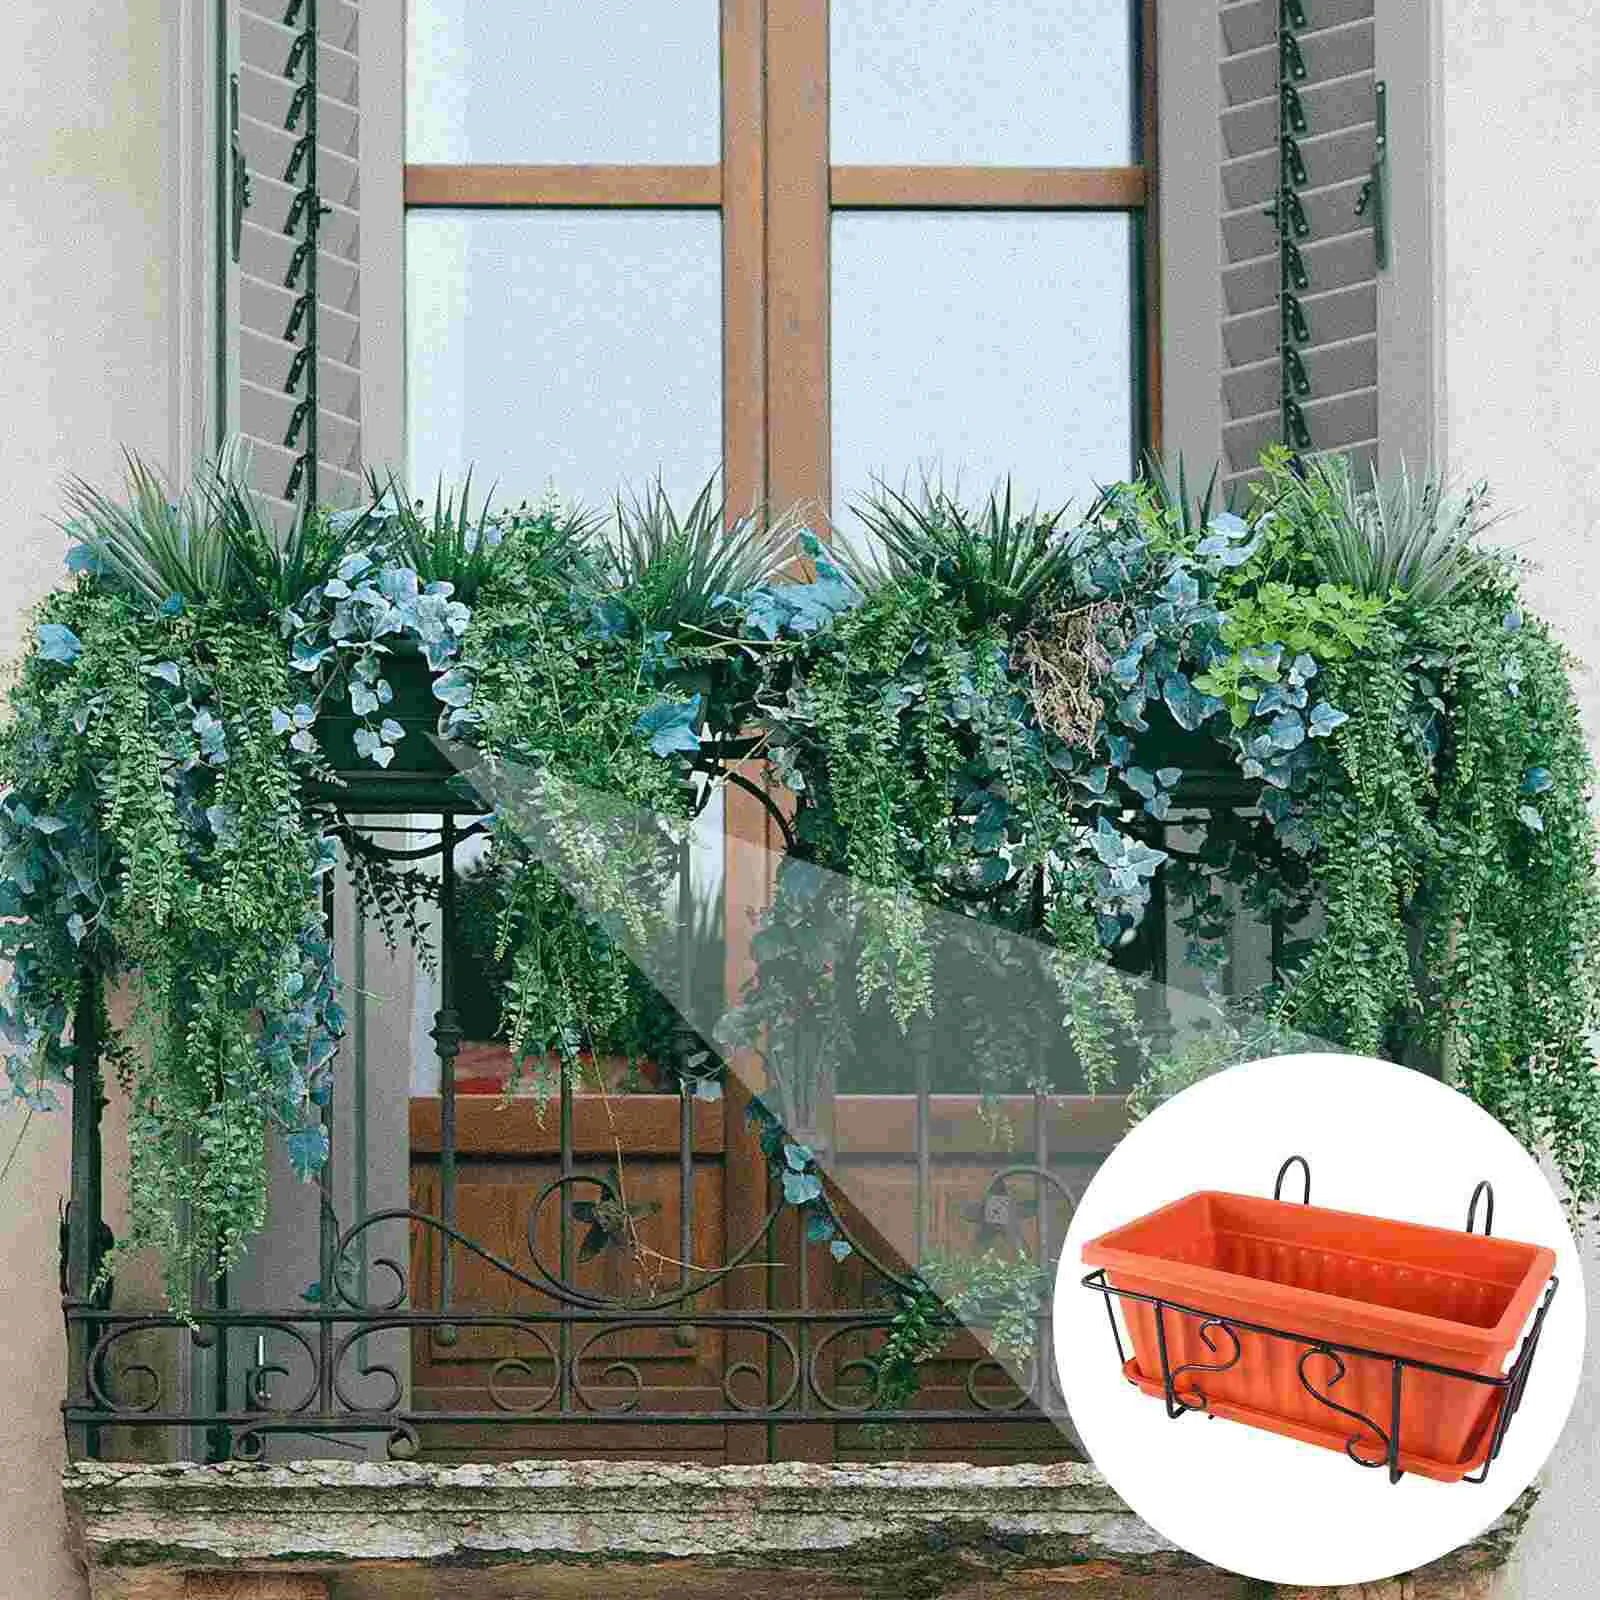 

Window Box Planter Rectangular Flower Pot Deck Hanging Planter Balcony Flower Pot with Rack and Tray for Home Gardening Dark Red